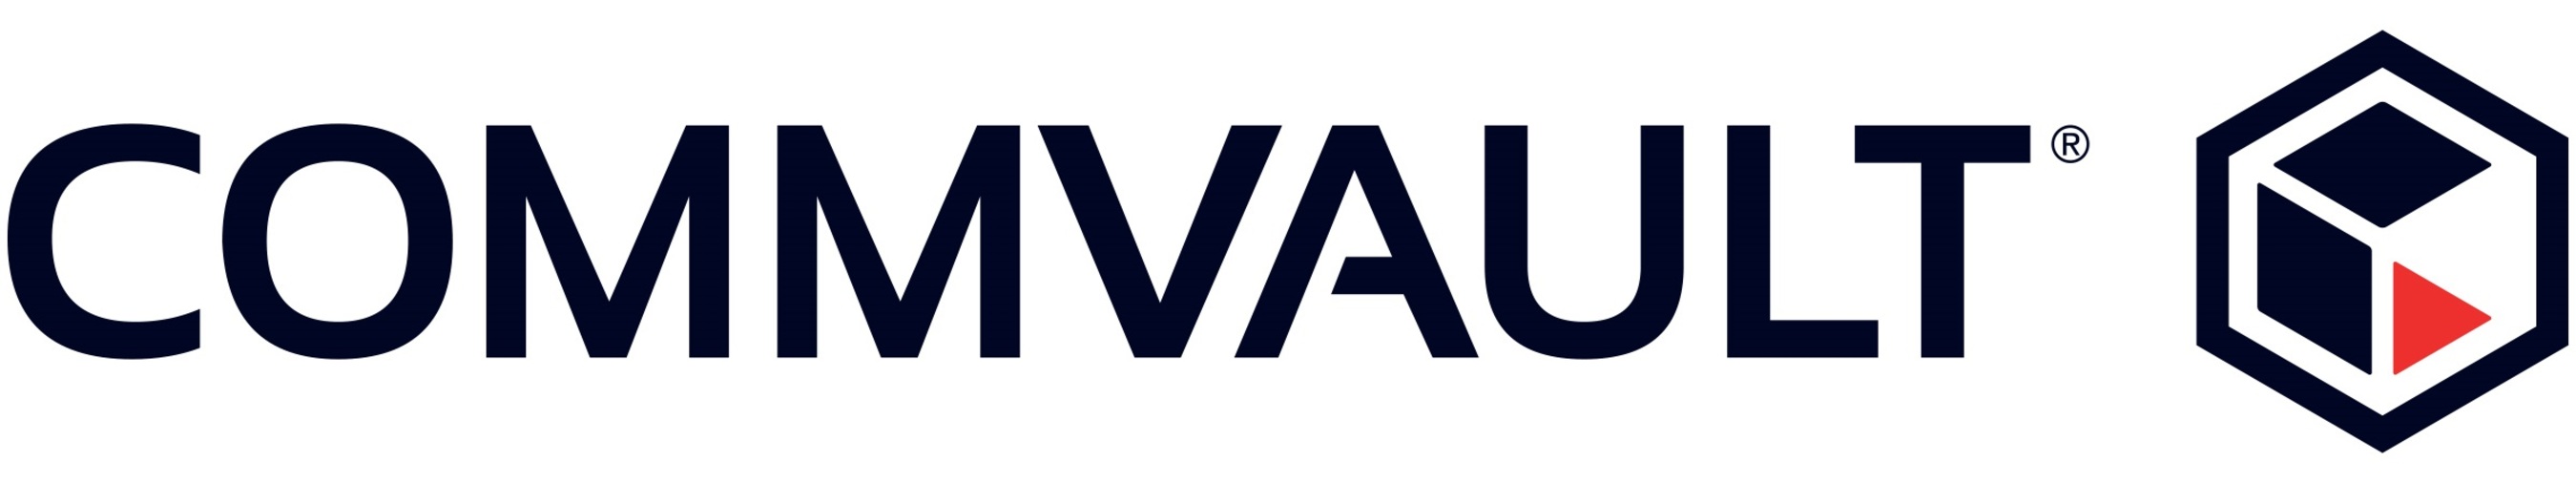 Commvault is the leader in enterprise data protection and information management